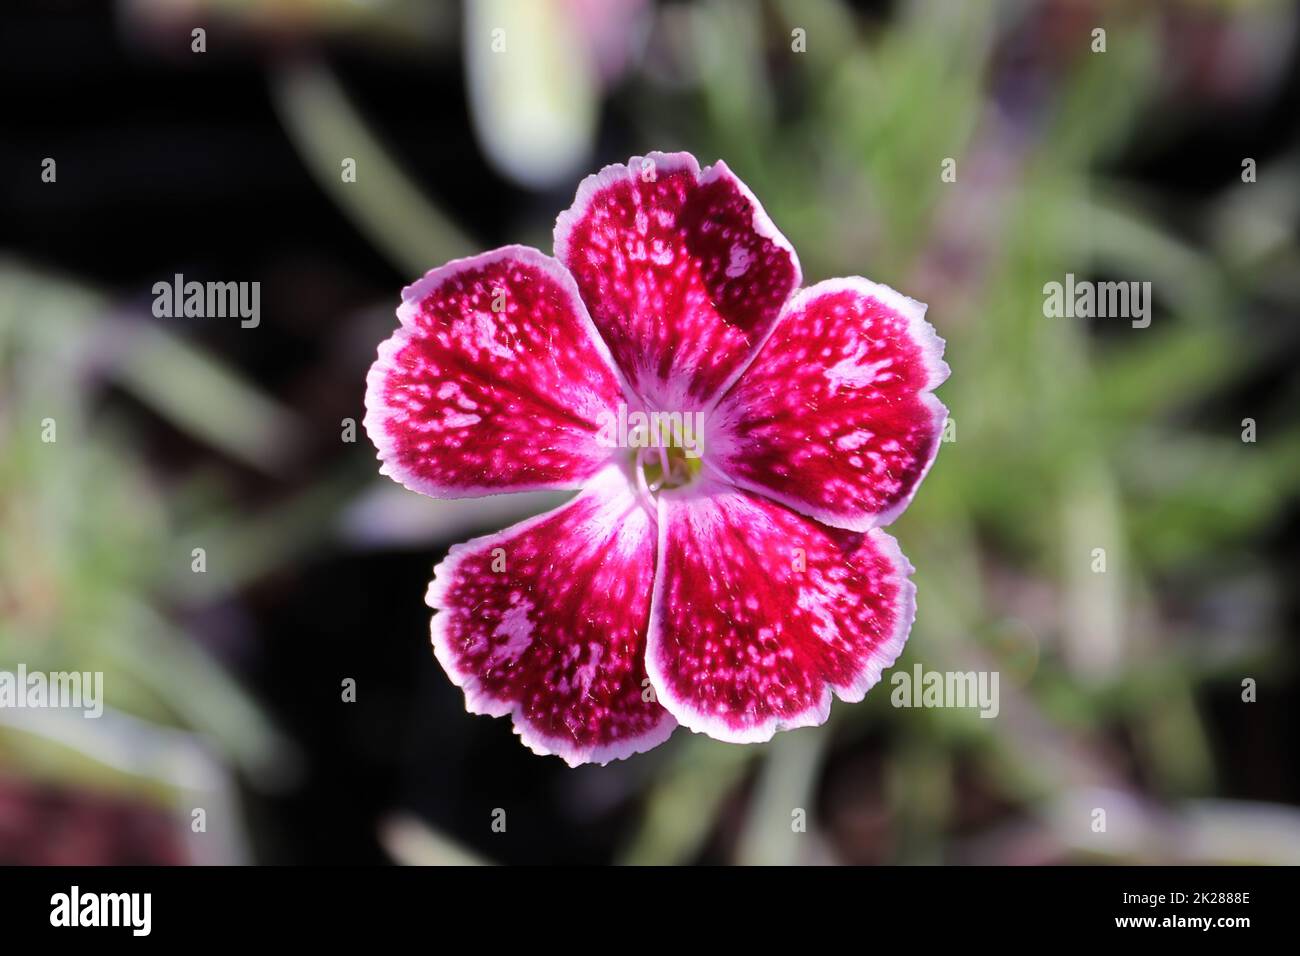 Closeup fo the pink flower on a dianthus plant Stock Photo